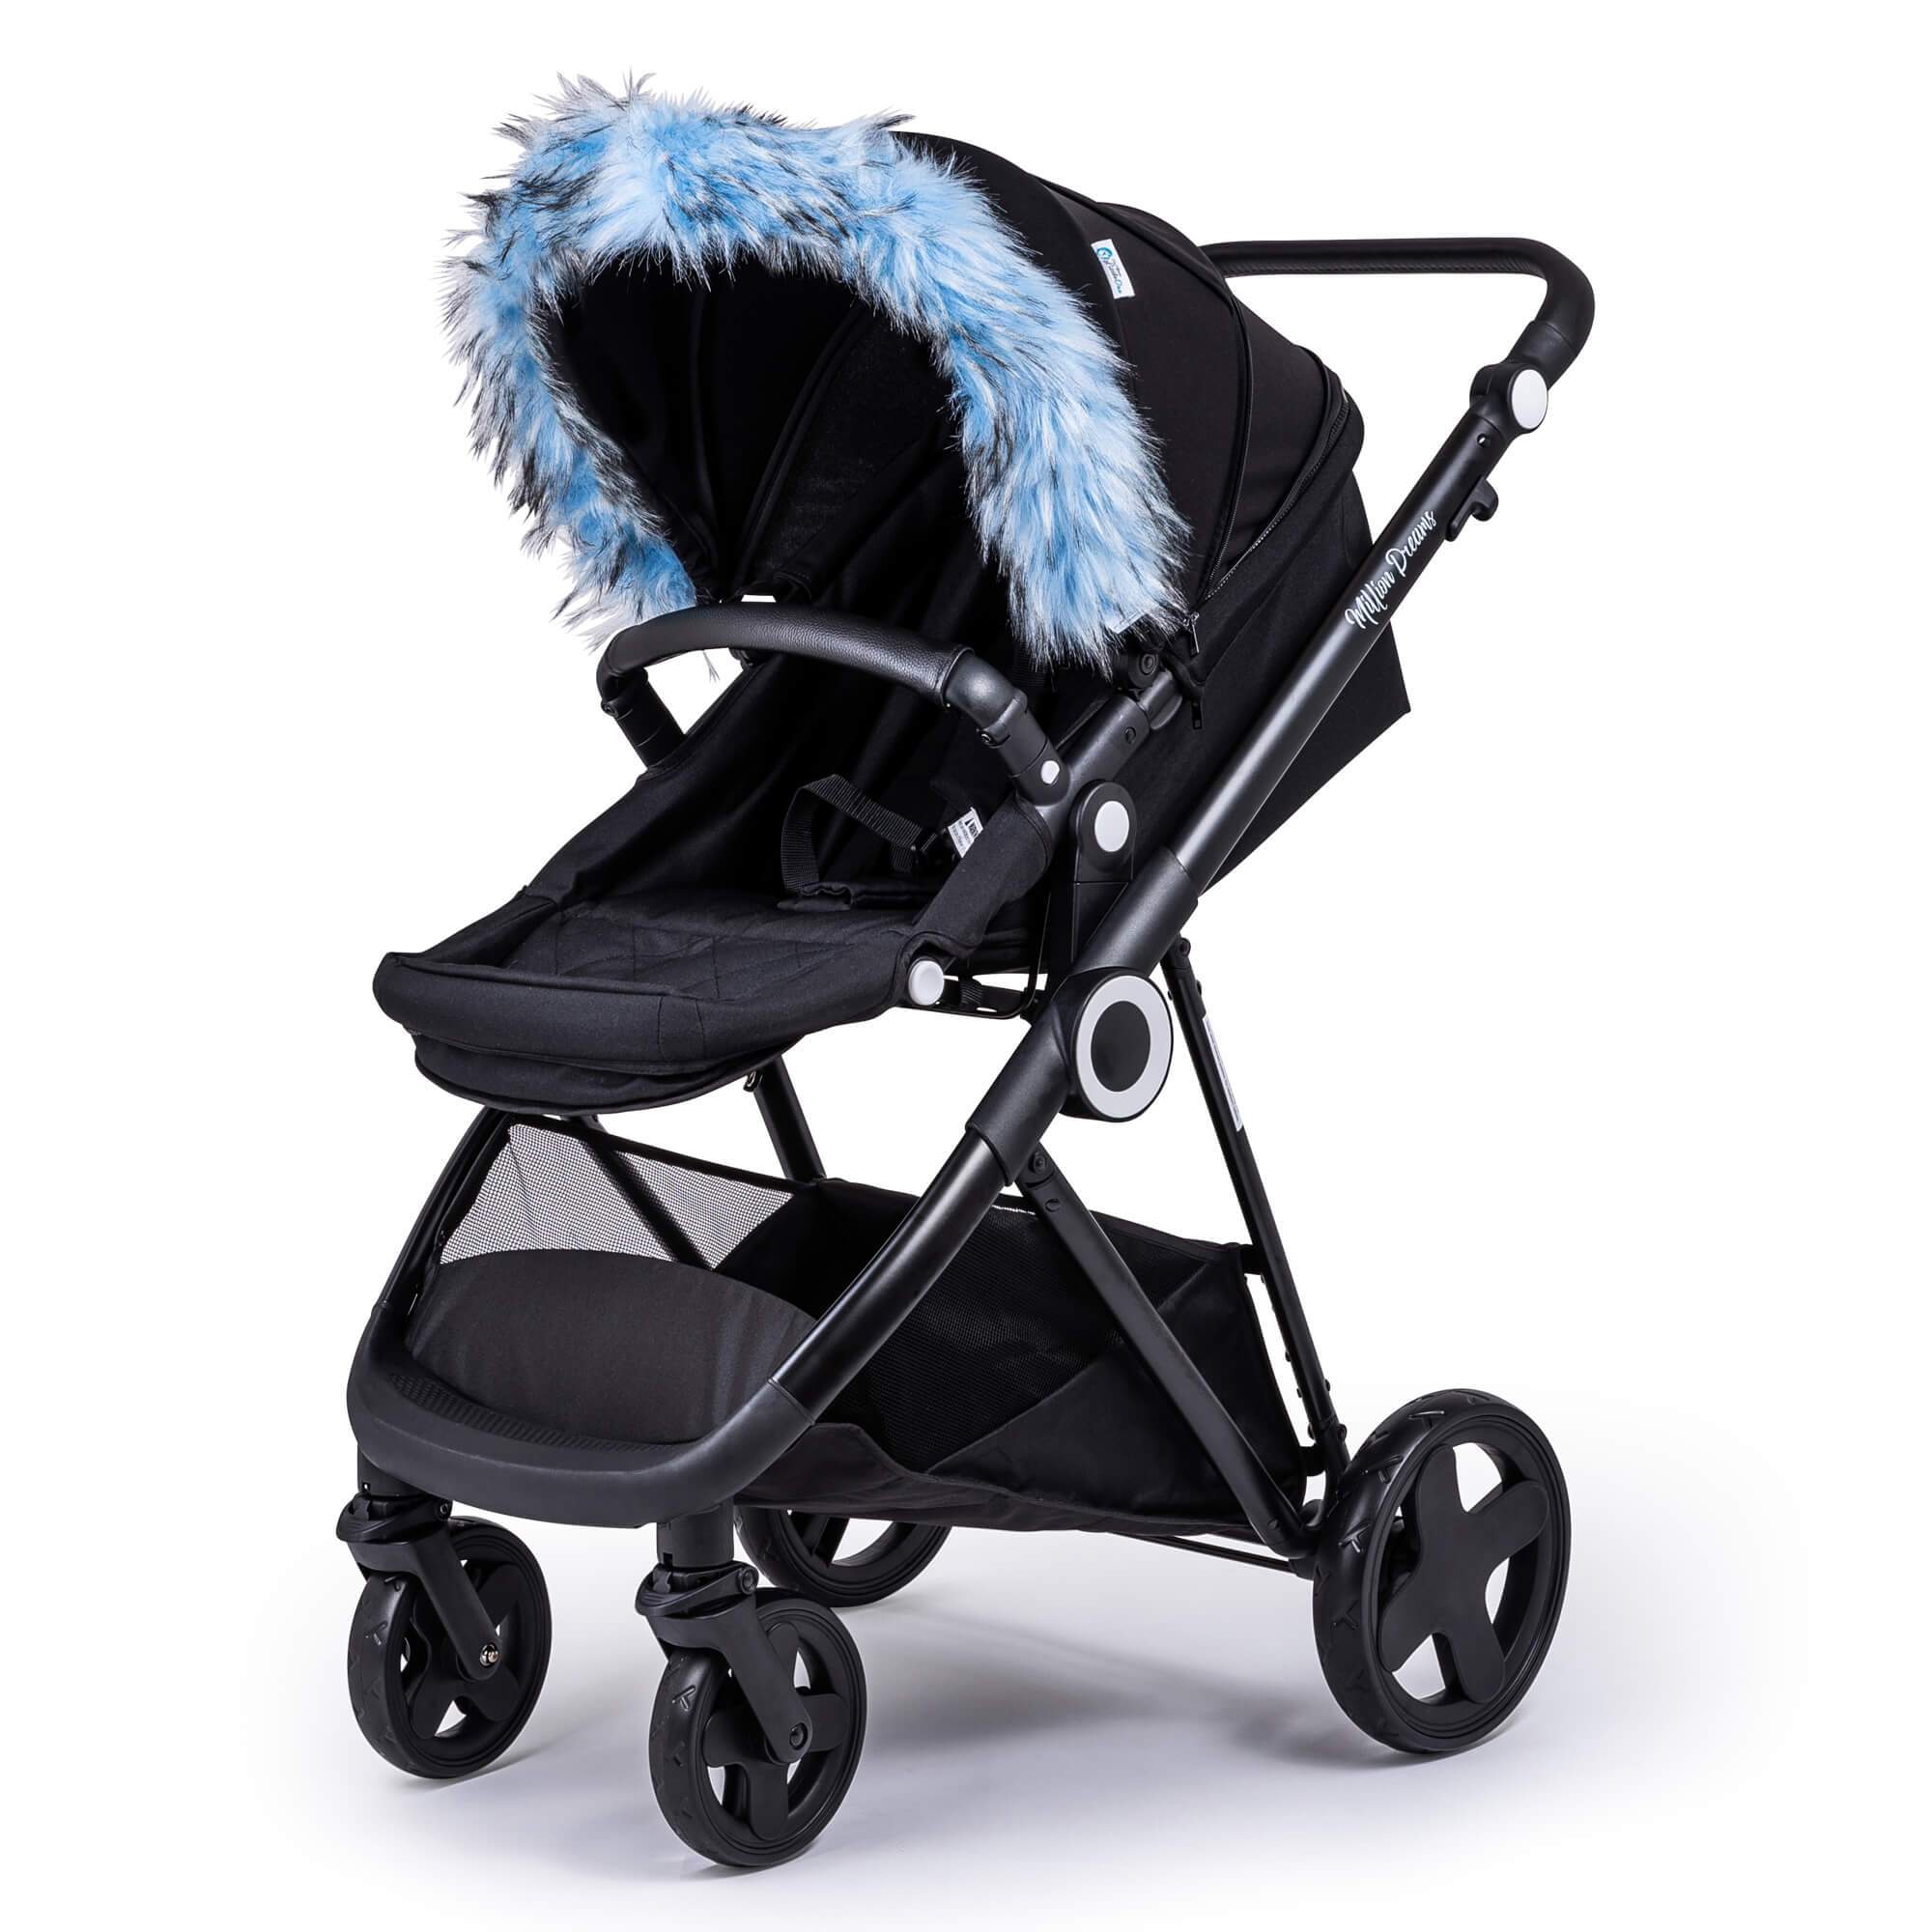 Pram Fur Hood Trim Attachment for Pushchair Compatible with Mutsy - Light Blue / Fits All Models | For Your Little One